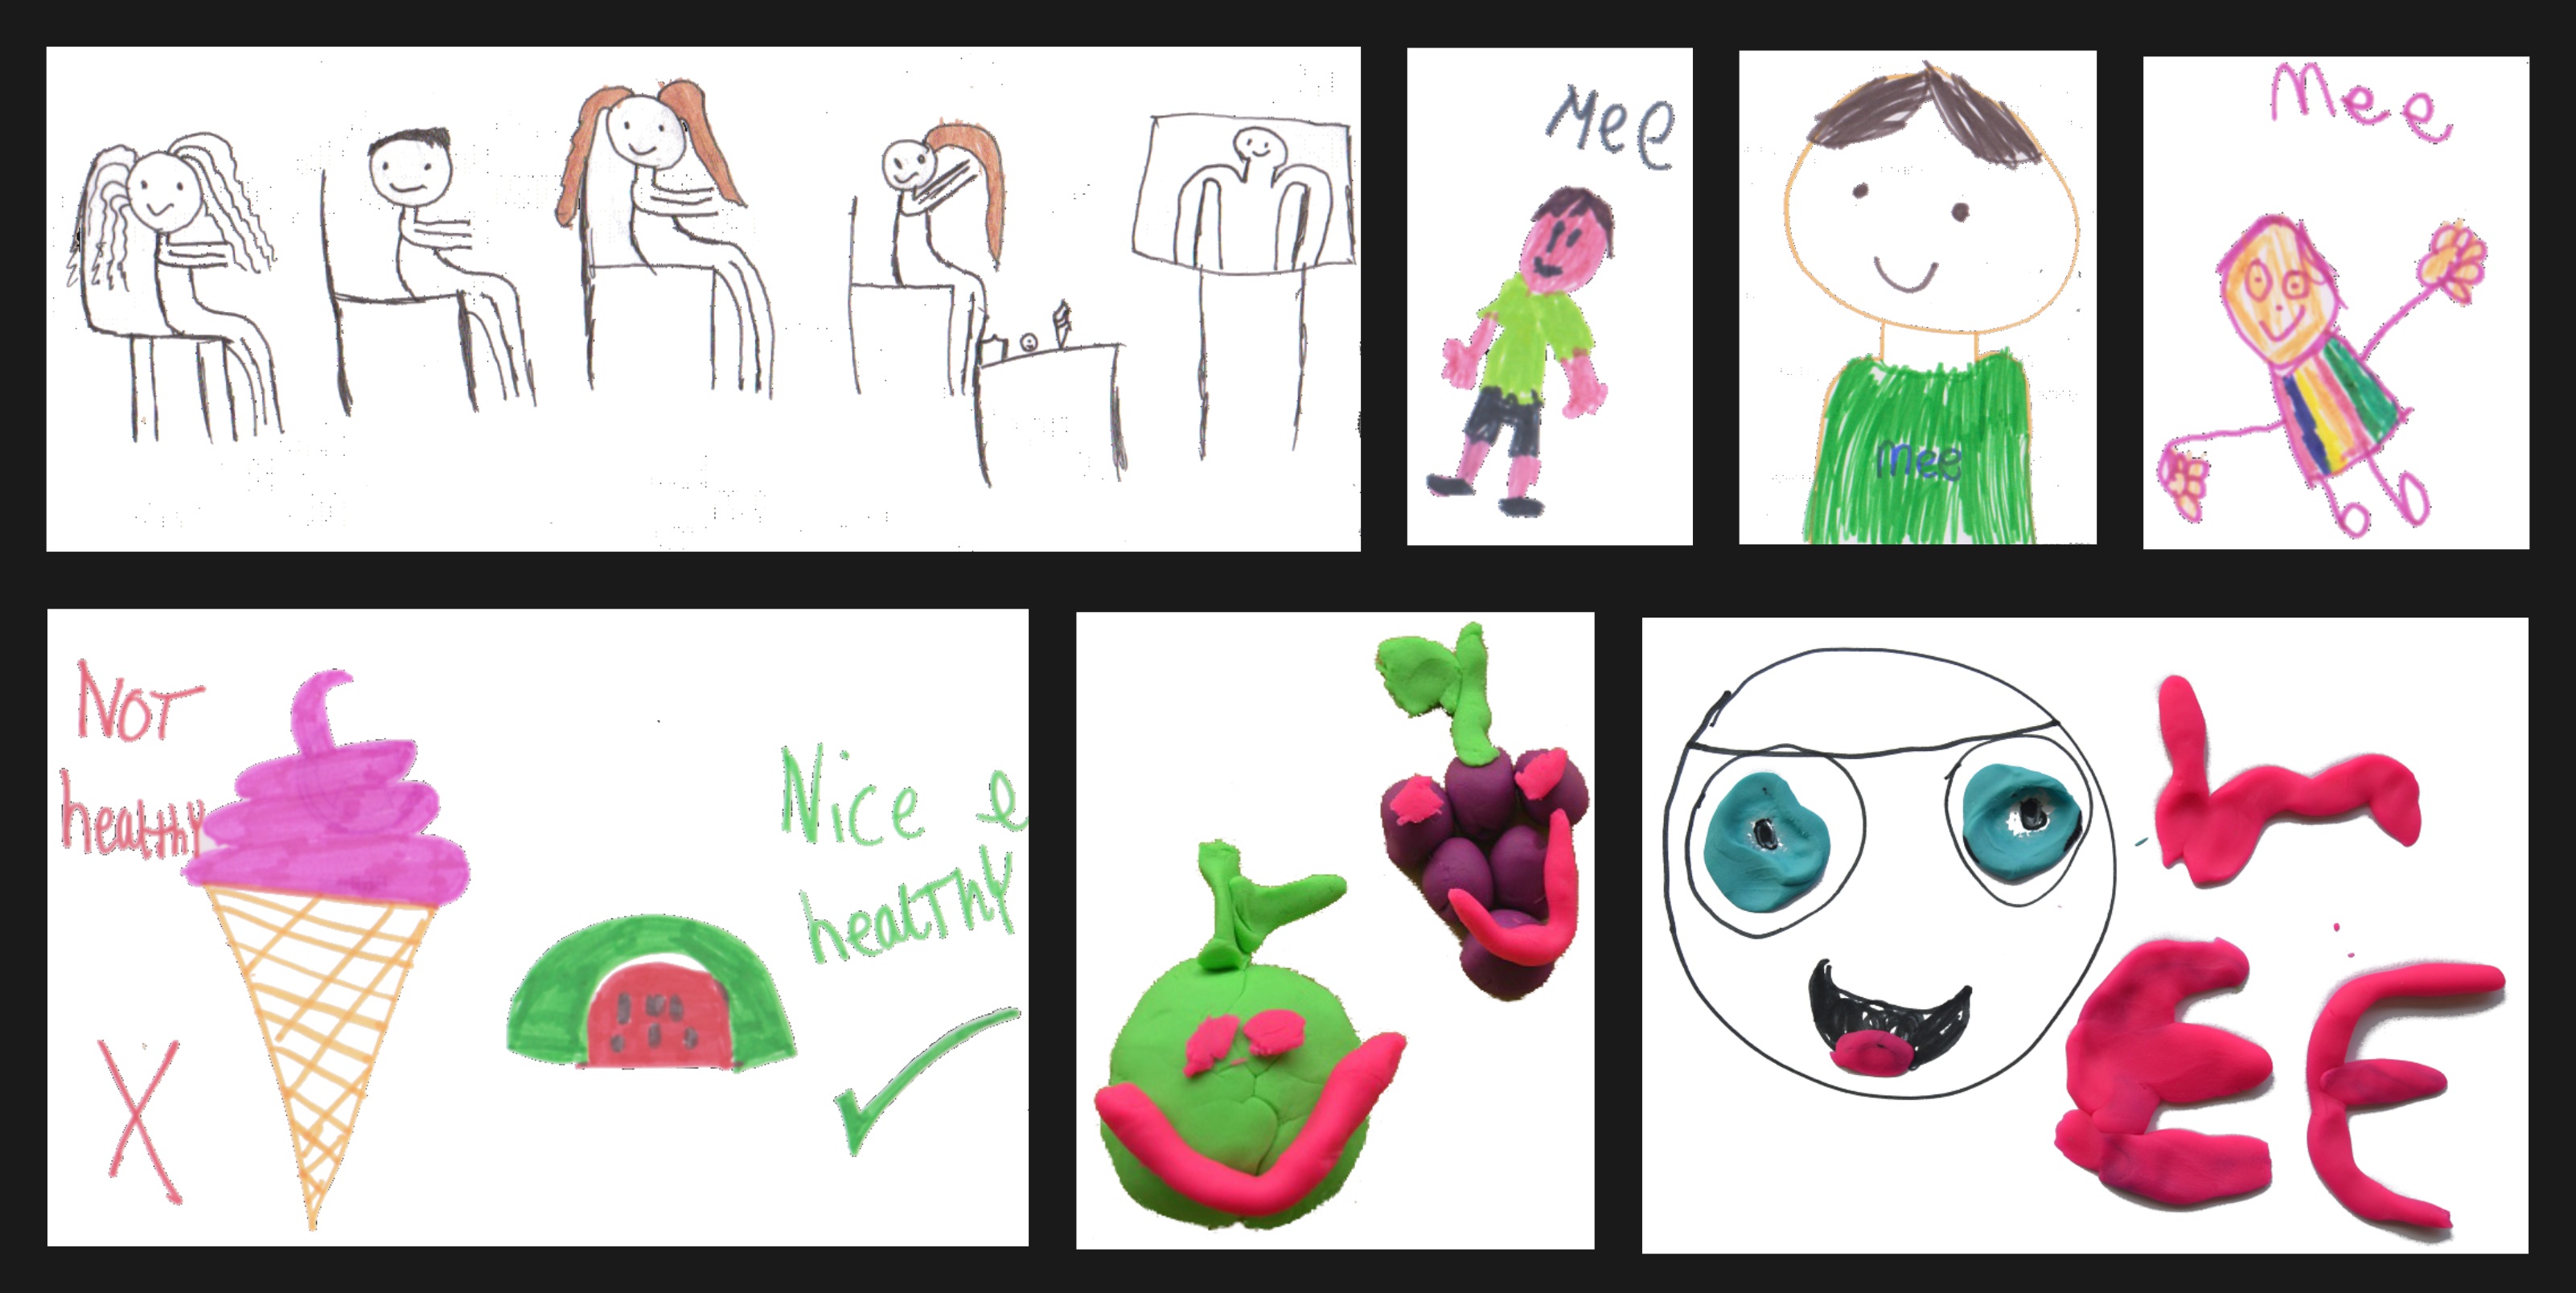 Some of the children’s drawings and crafts